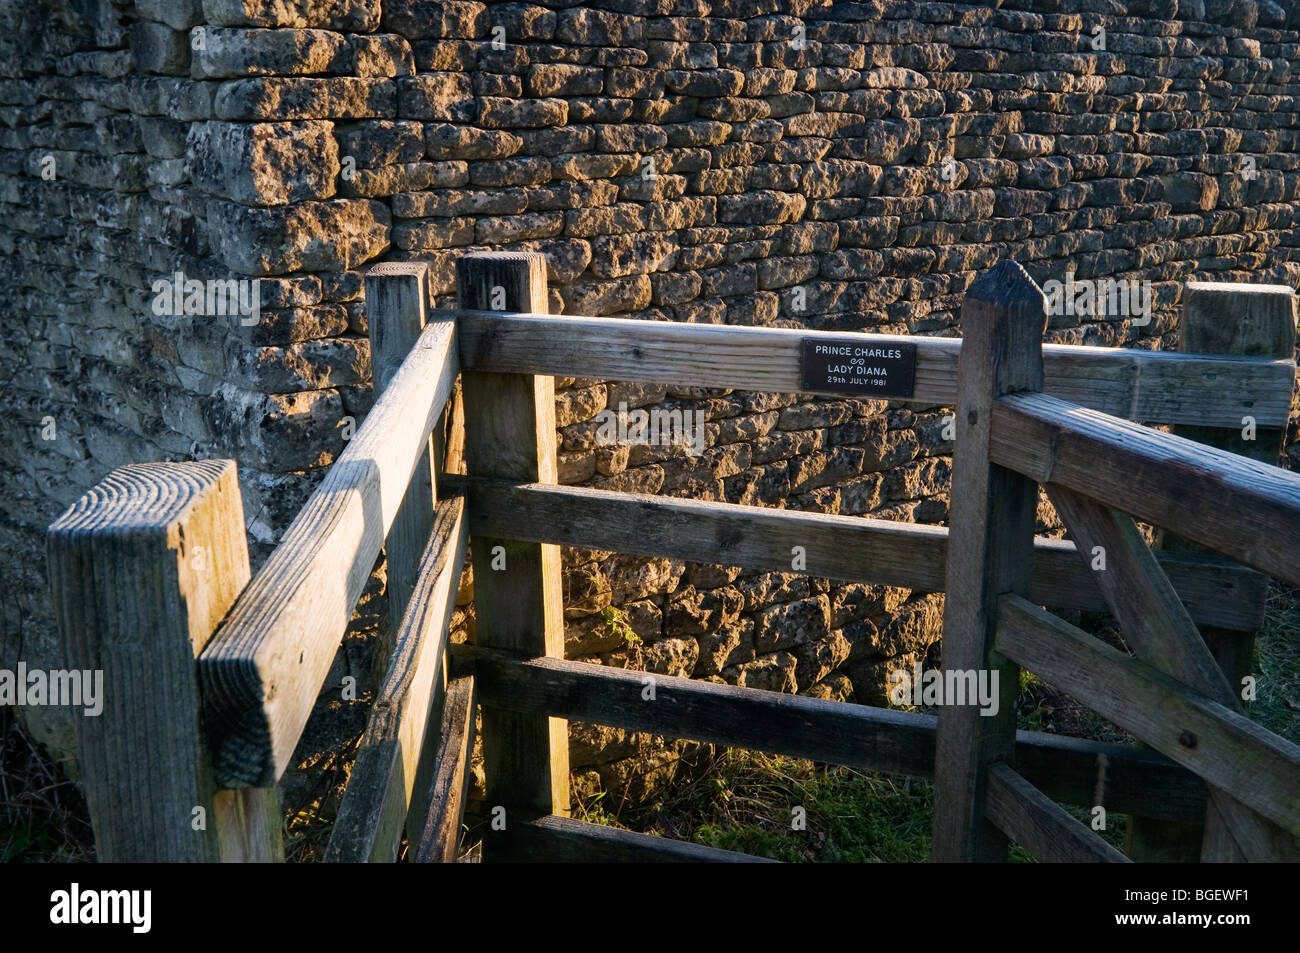 Frosted Kissing gate with Charles & Diana wedding plaque at Lower Slaughter, Cotswolds Stock Photo